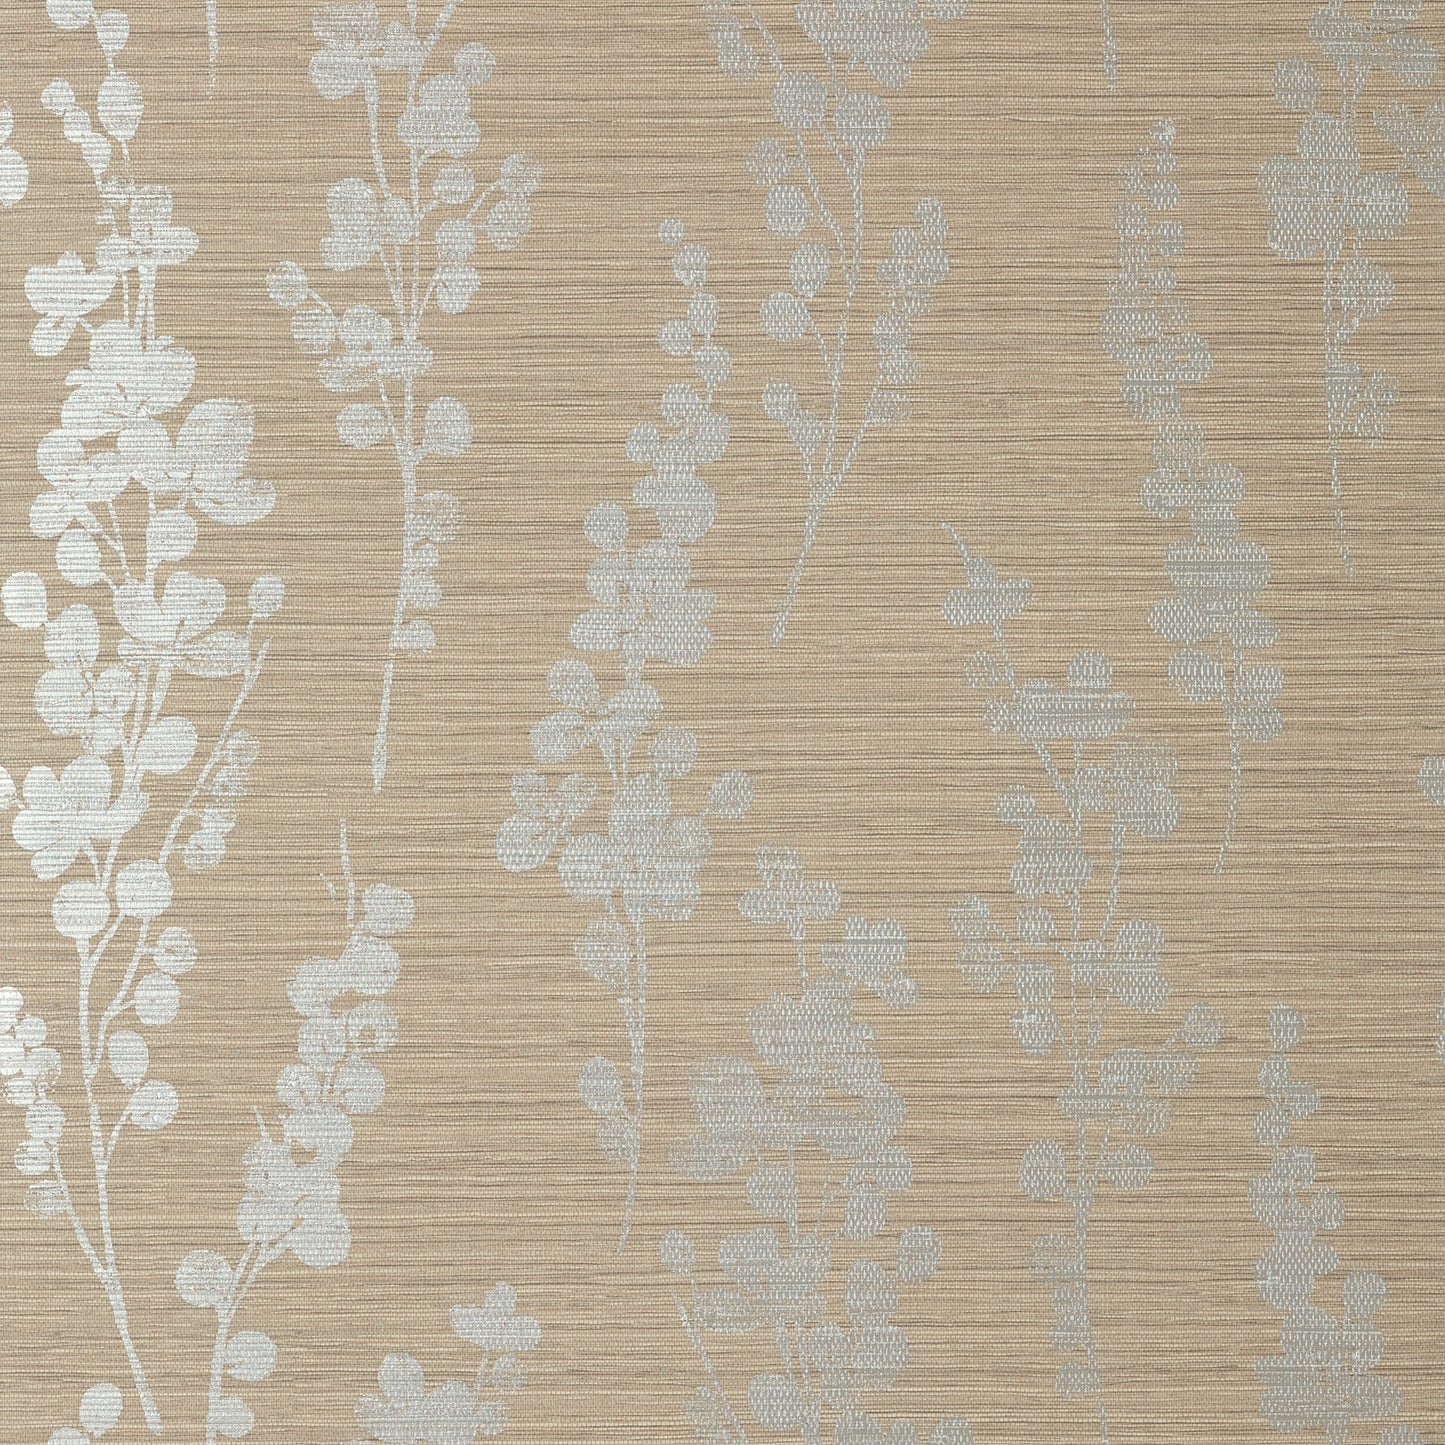 Purchase Thibaut Wallpaper Pattern number T41053 pattern name Spring Blooms color Metallic Silver on Taupe. 